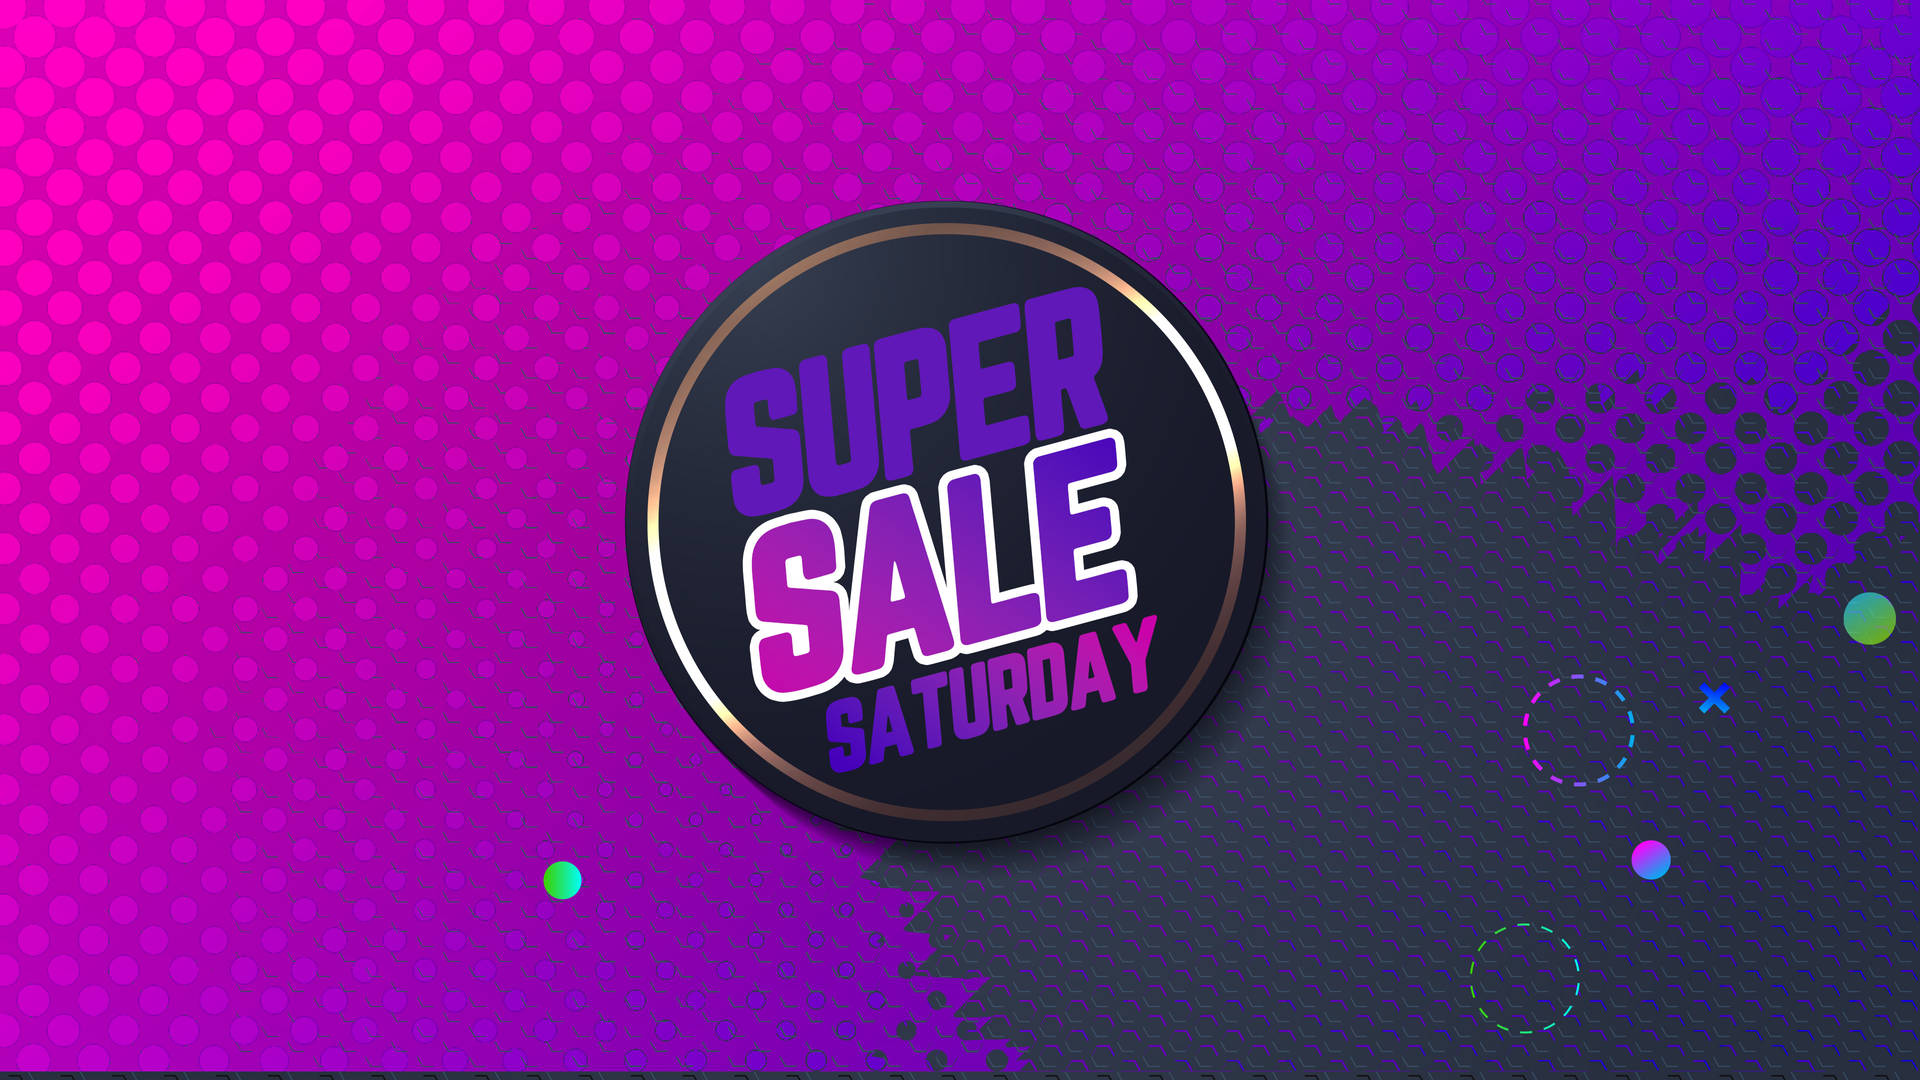 Exciting Super Saturday Sale! Background